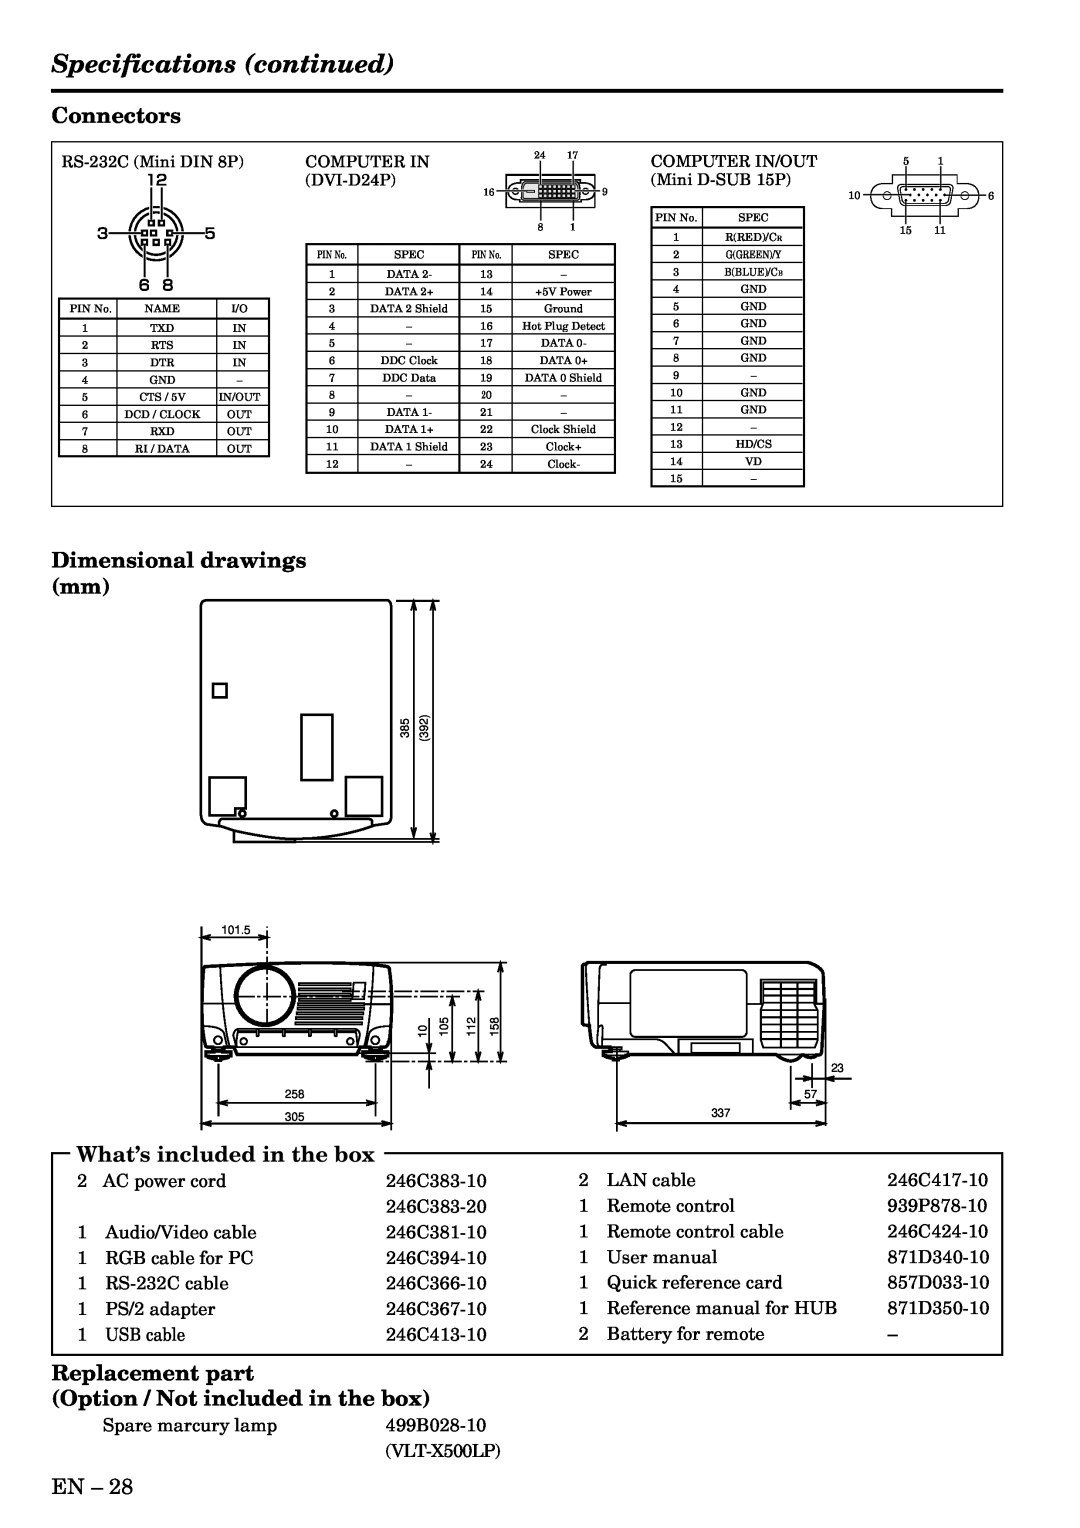 Mitsubishi Electronics X500U Specifications continued, Connectors, Dimensional drawings mm, What’s included in the box 